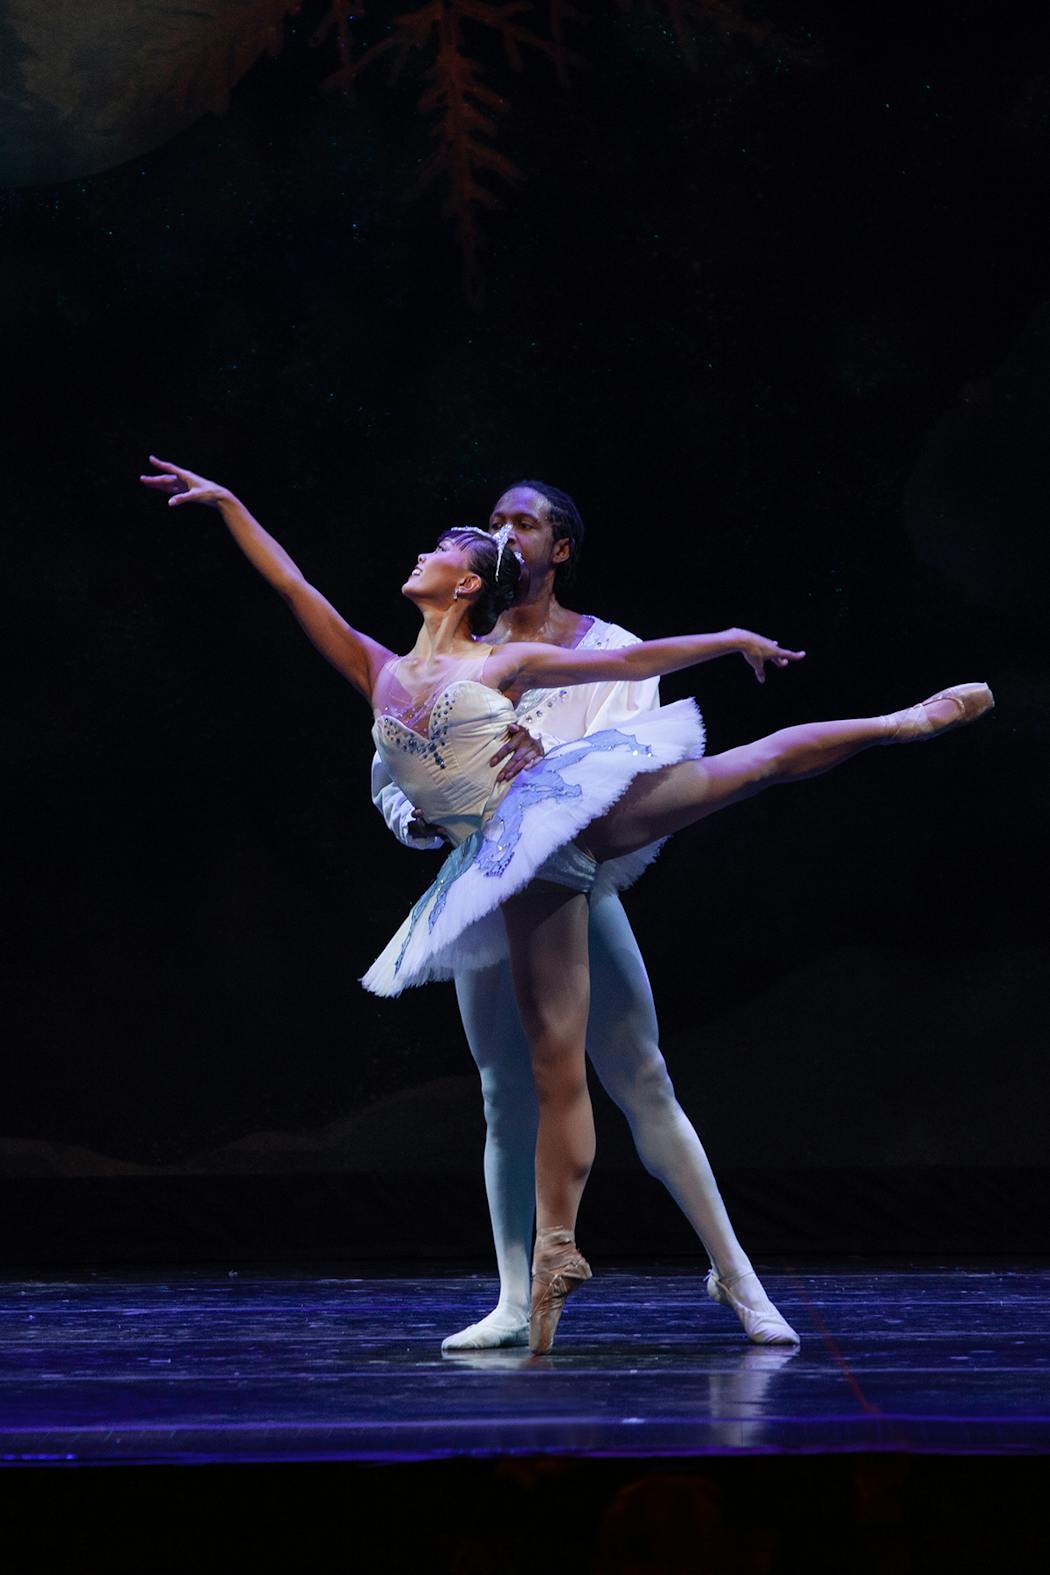 Minnesota Dance Theatre is moving toward skin tone tights and shoes for several roles in 'Loyce Houlton's Nutcracker Fantasy' Sarah Jordan (Queen of Snow) and Jayson Douglas (Cavalier) performed in the 2022 production.